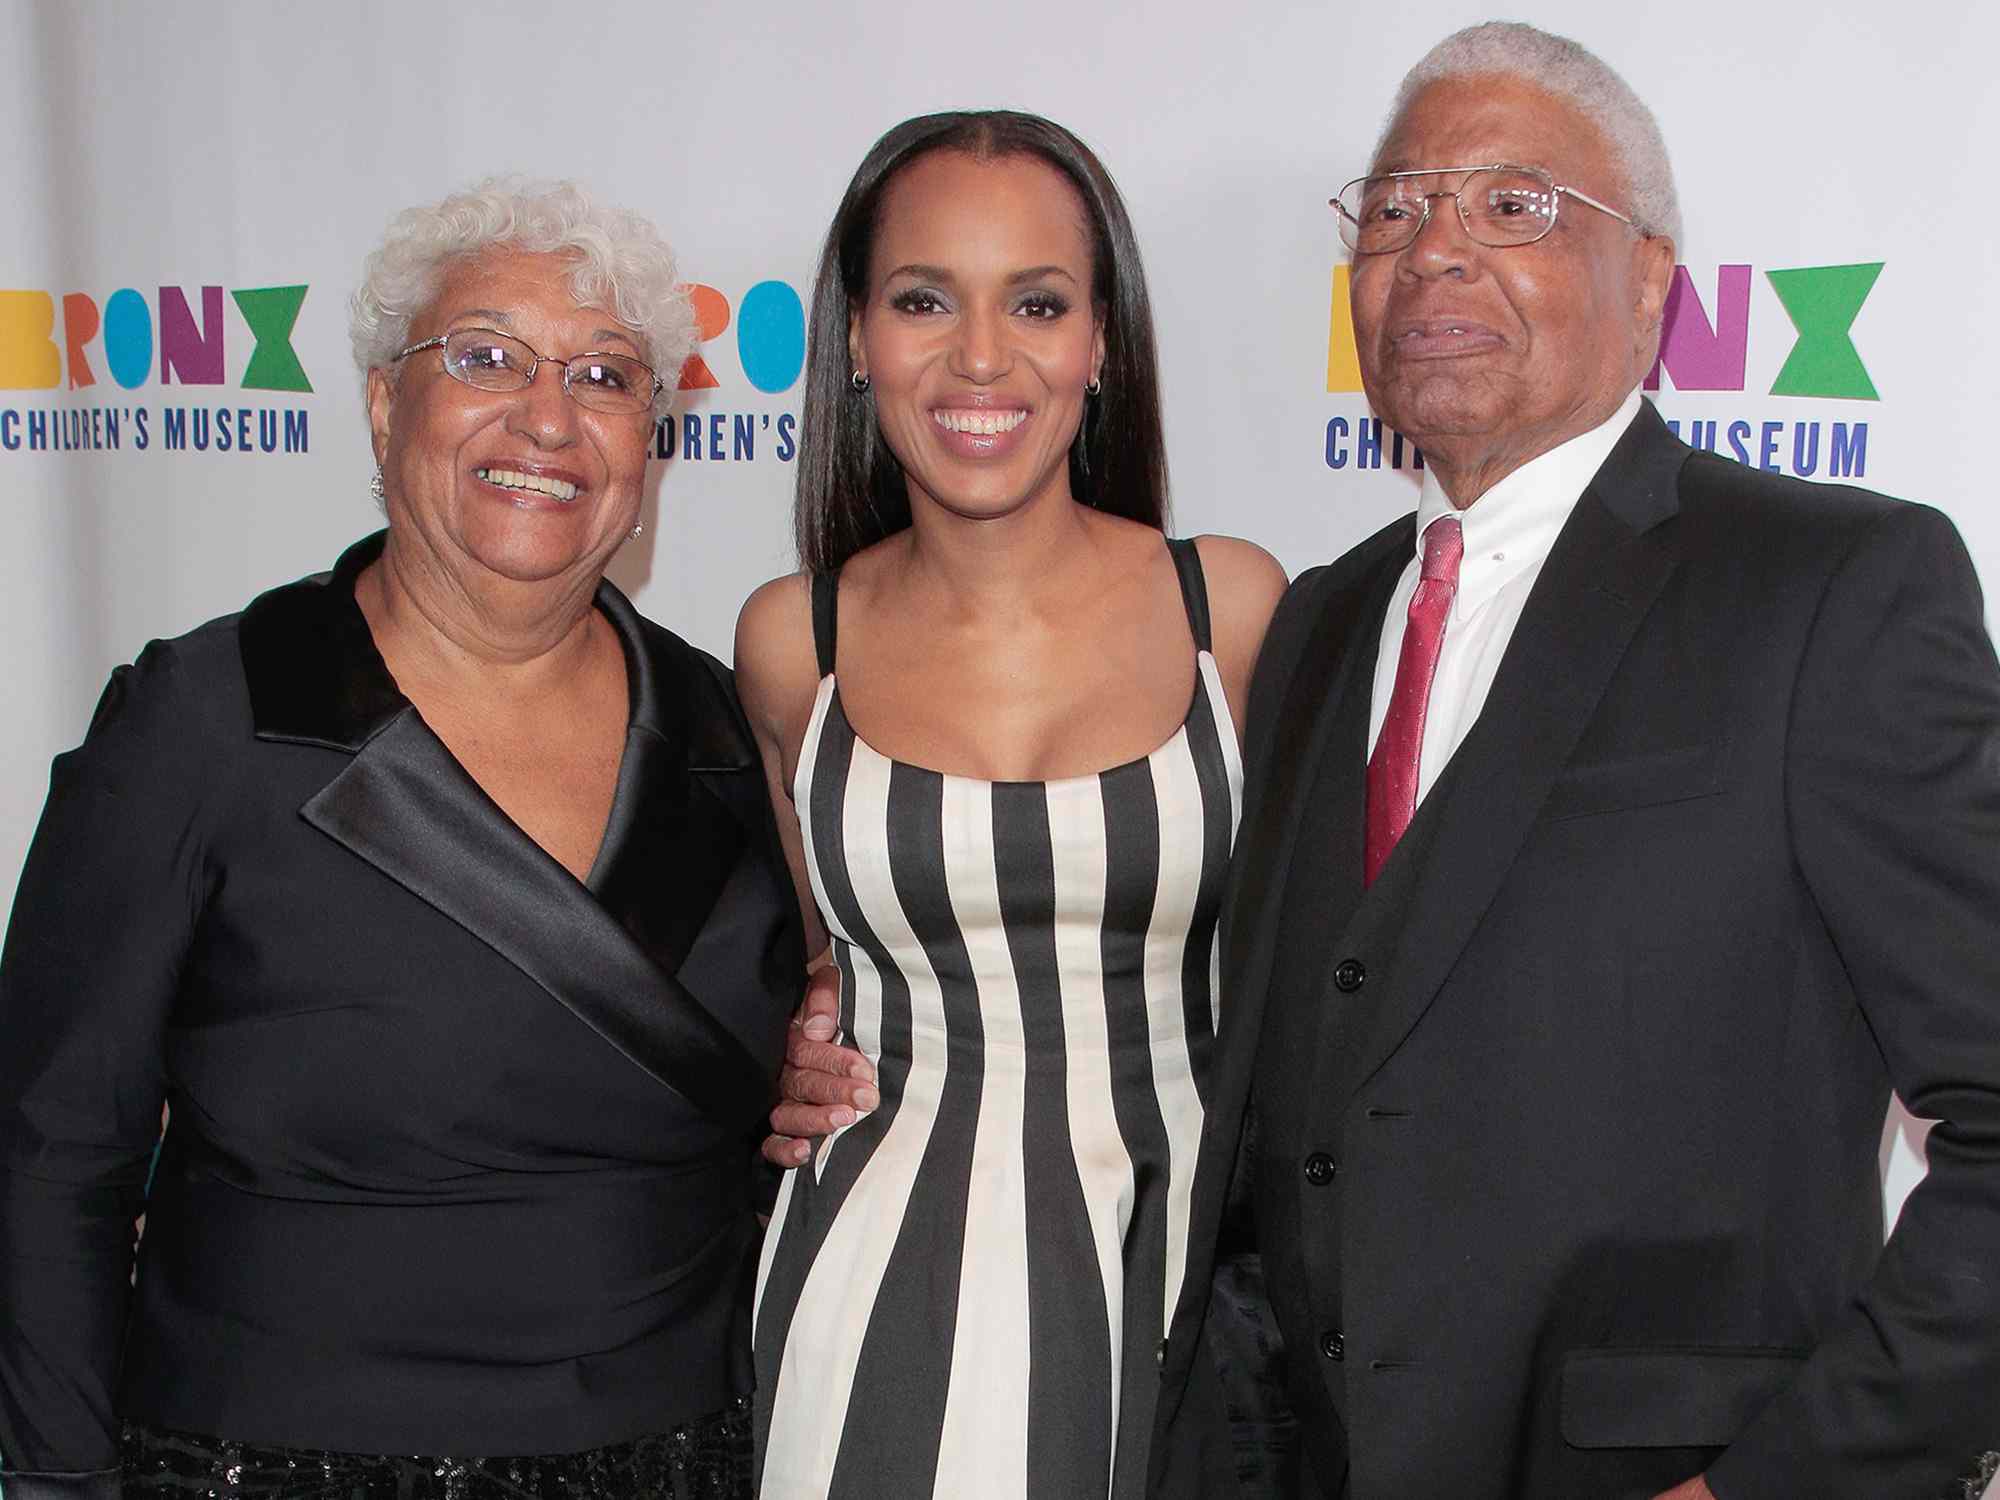 Kerry Washington poses with her parents Valerie and Earl Washington during the 2017 The Bronx Children's Museum Gala